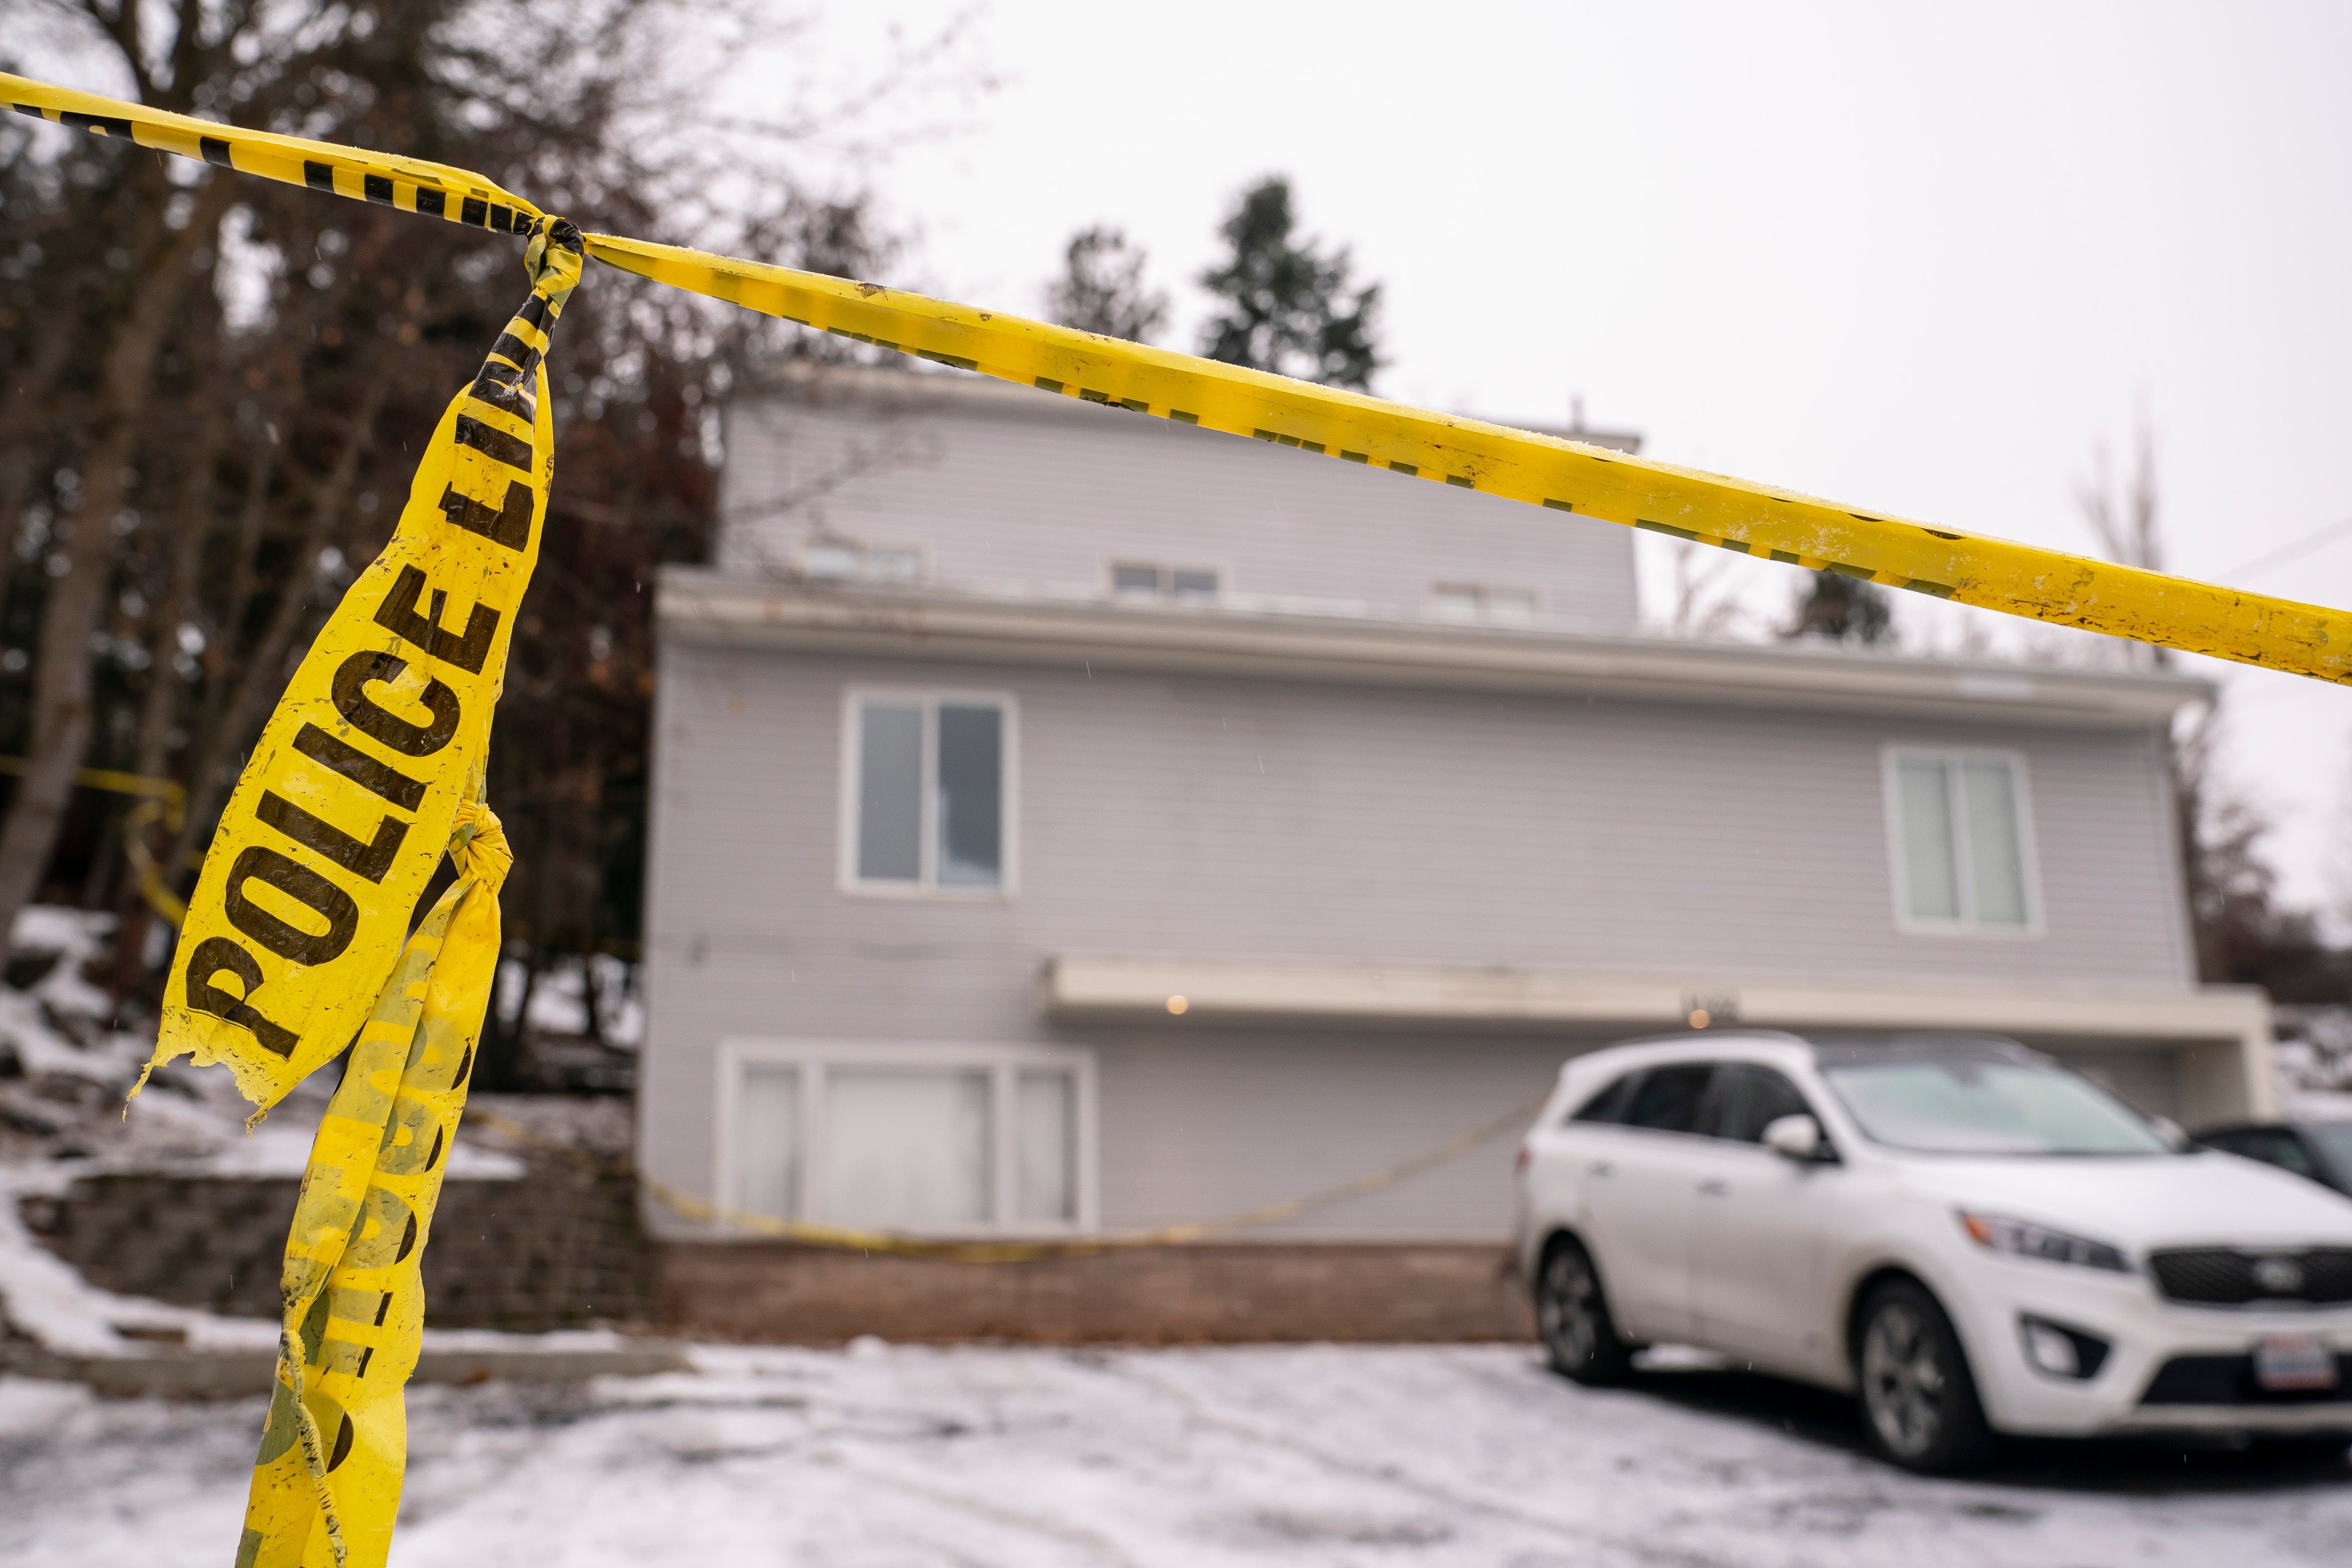 Police tape is seen in January 2023 at the Moscow, Idaho home where four University of Idaho students were killed. The house was demolished on 28 December